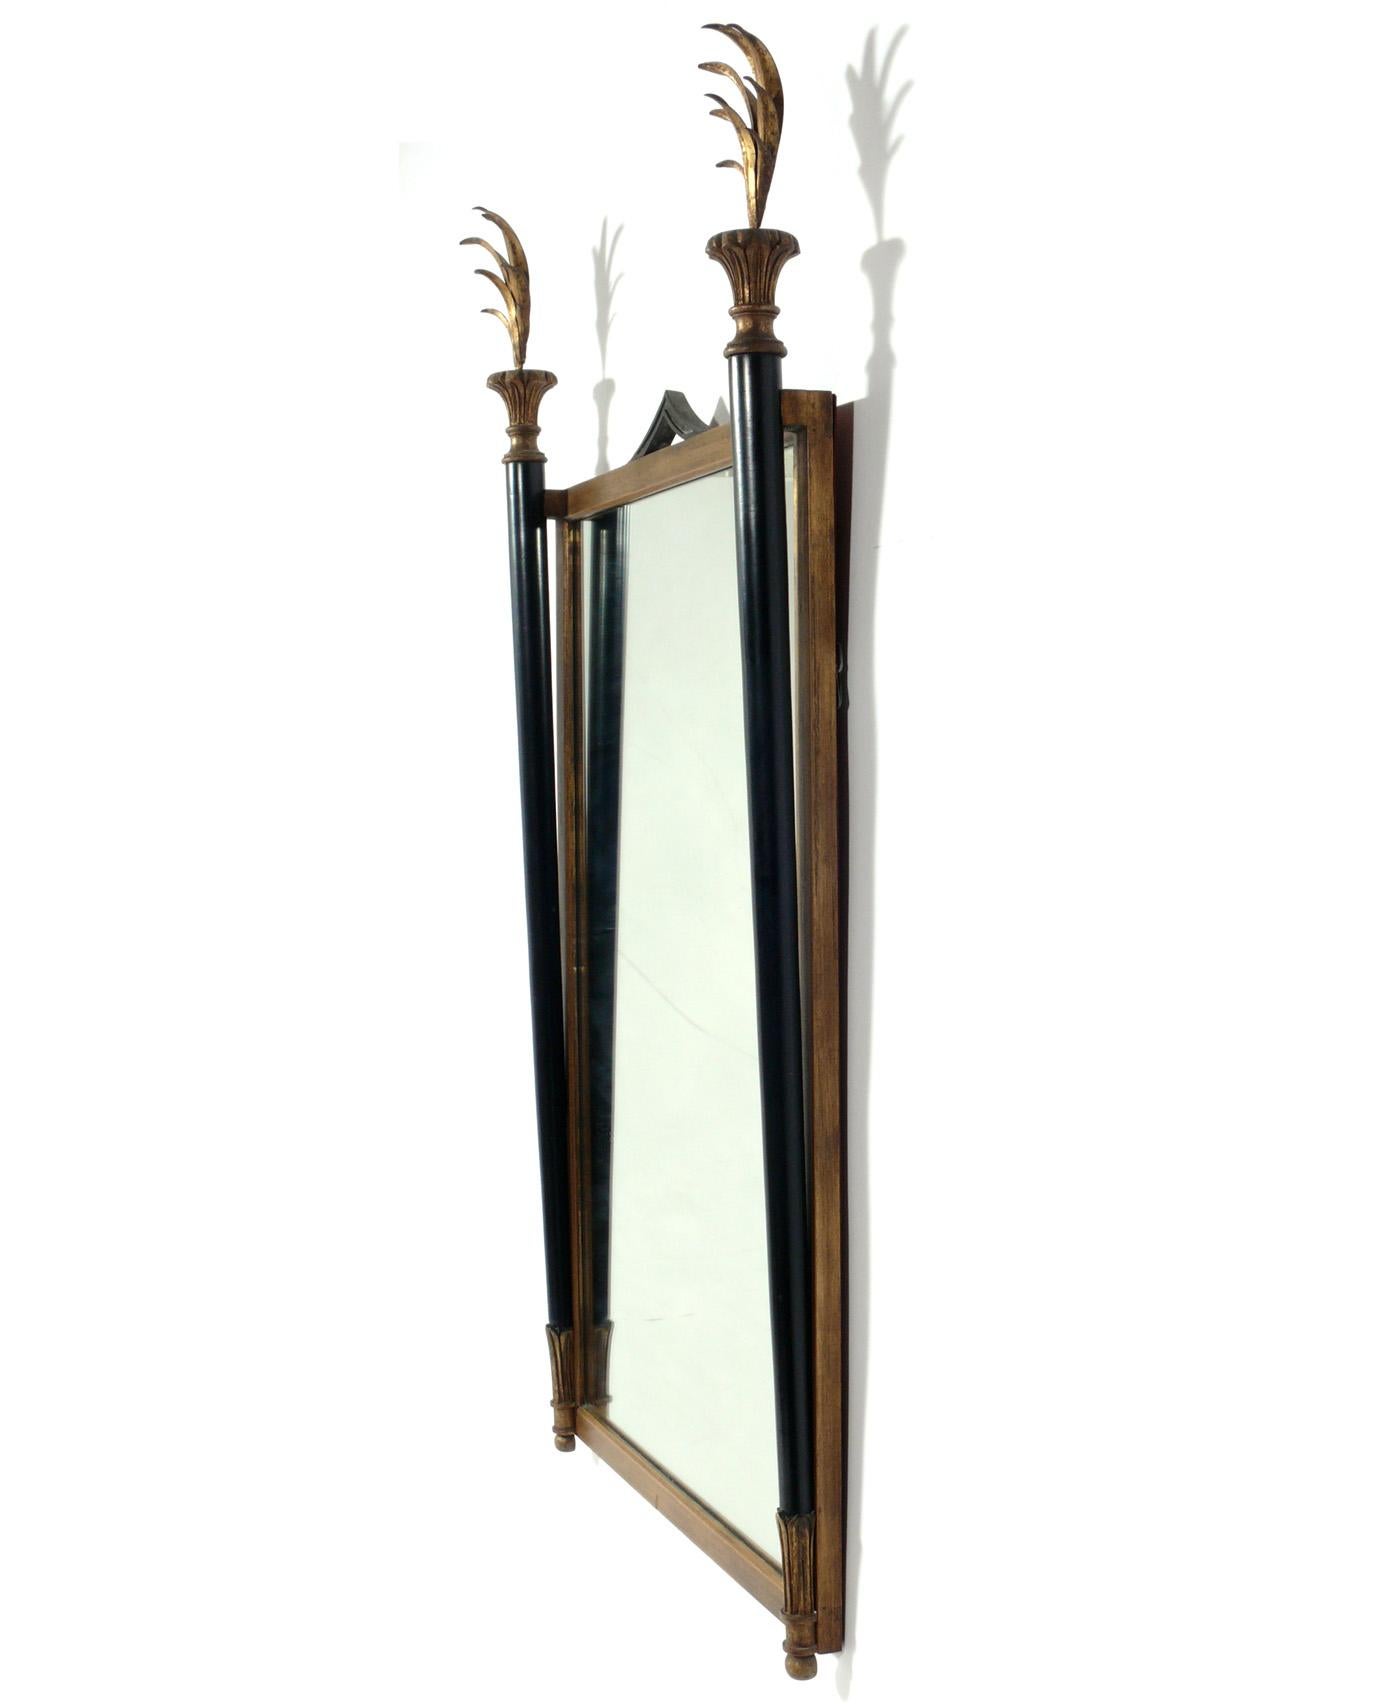 Elegant black and gilt neoclassical mirror by Palladio, Italy, circa 1960s. It measures an impressive 50